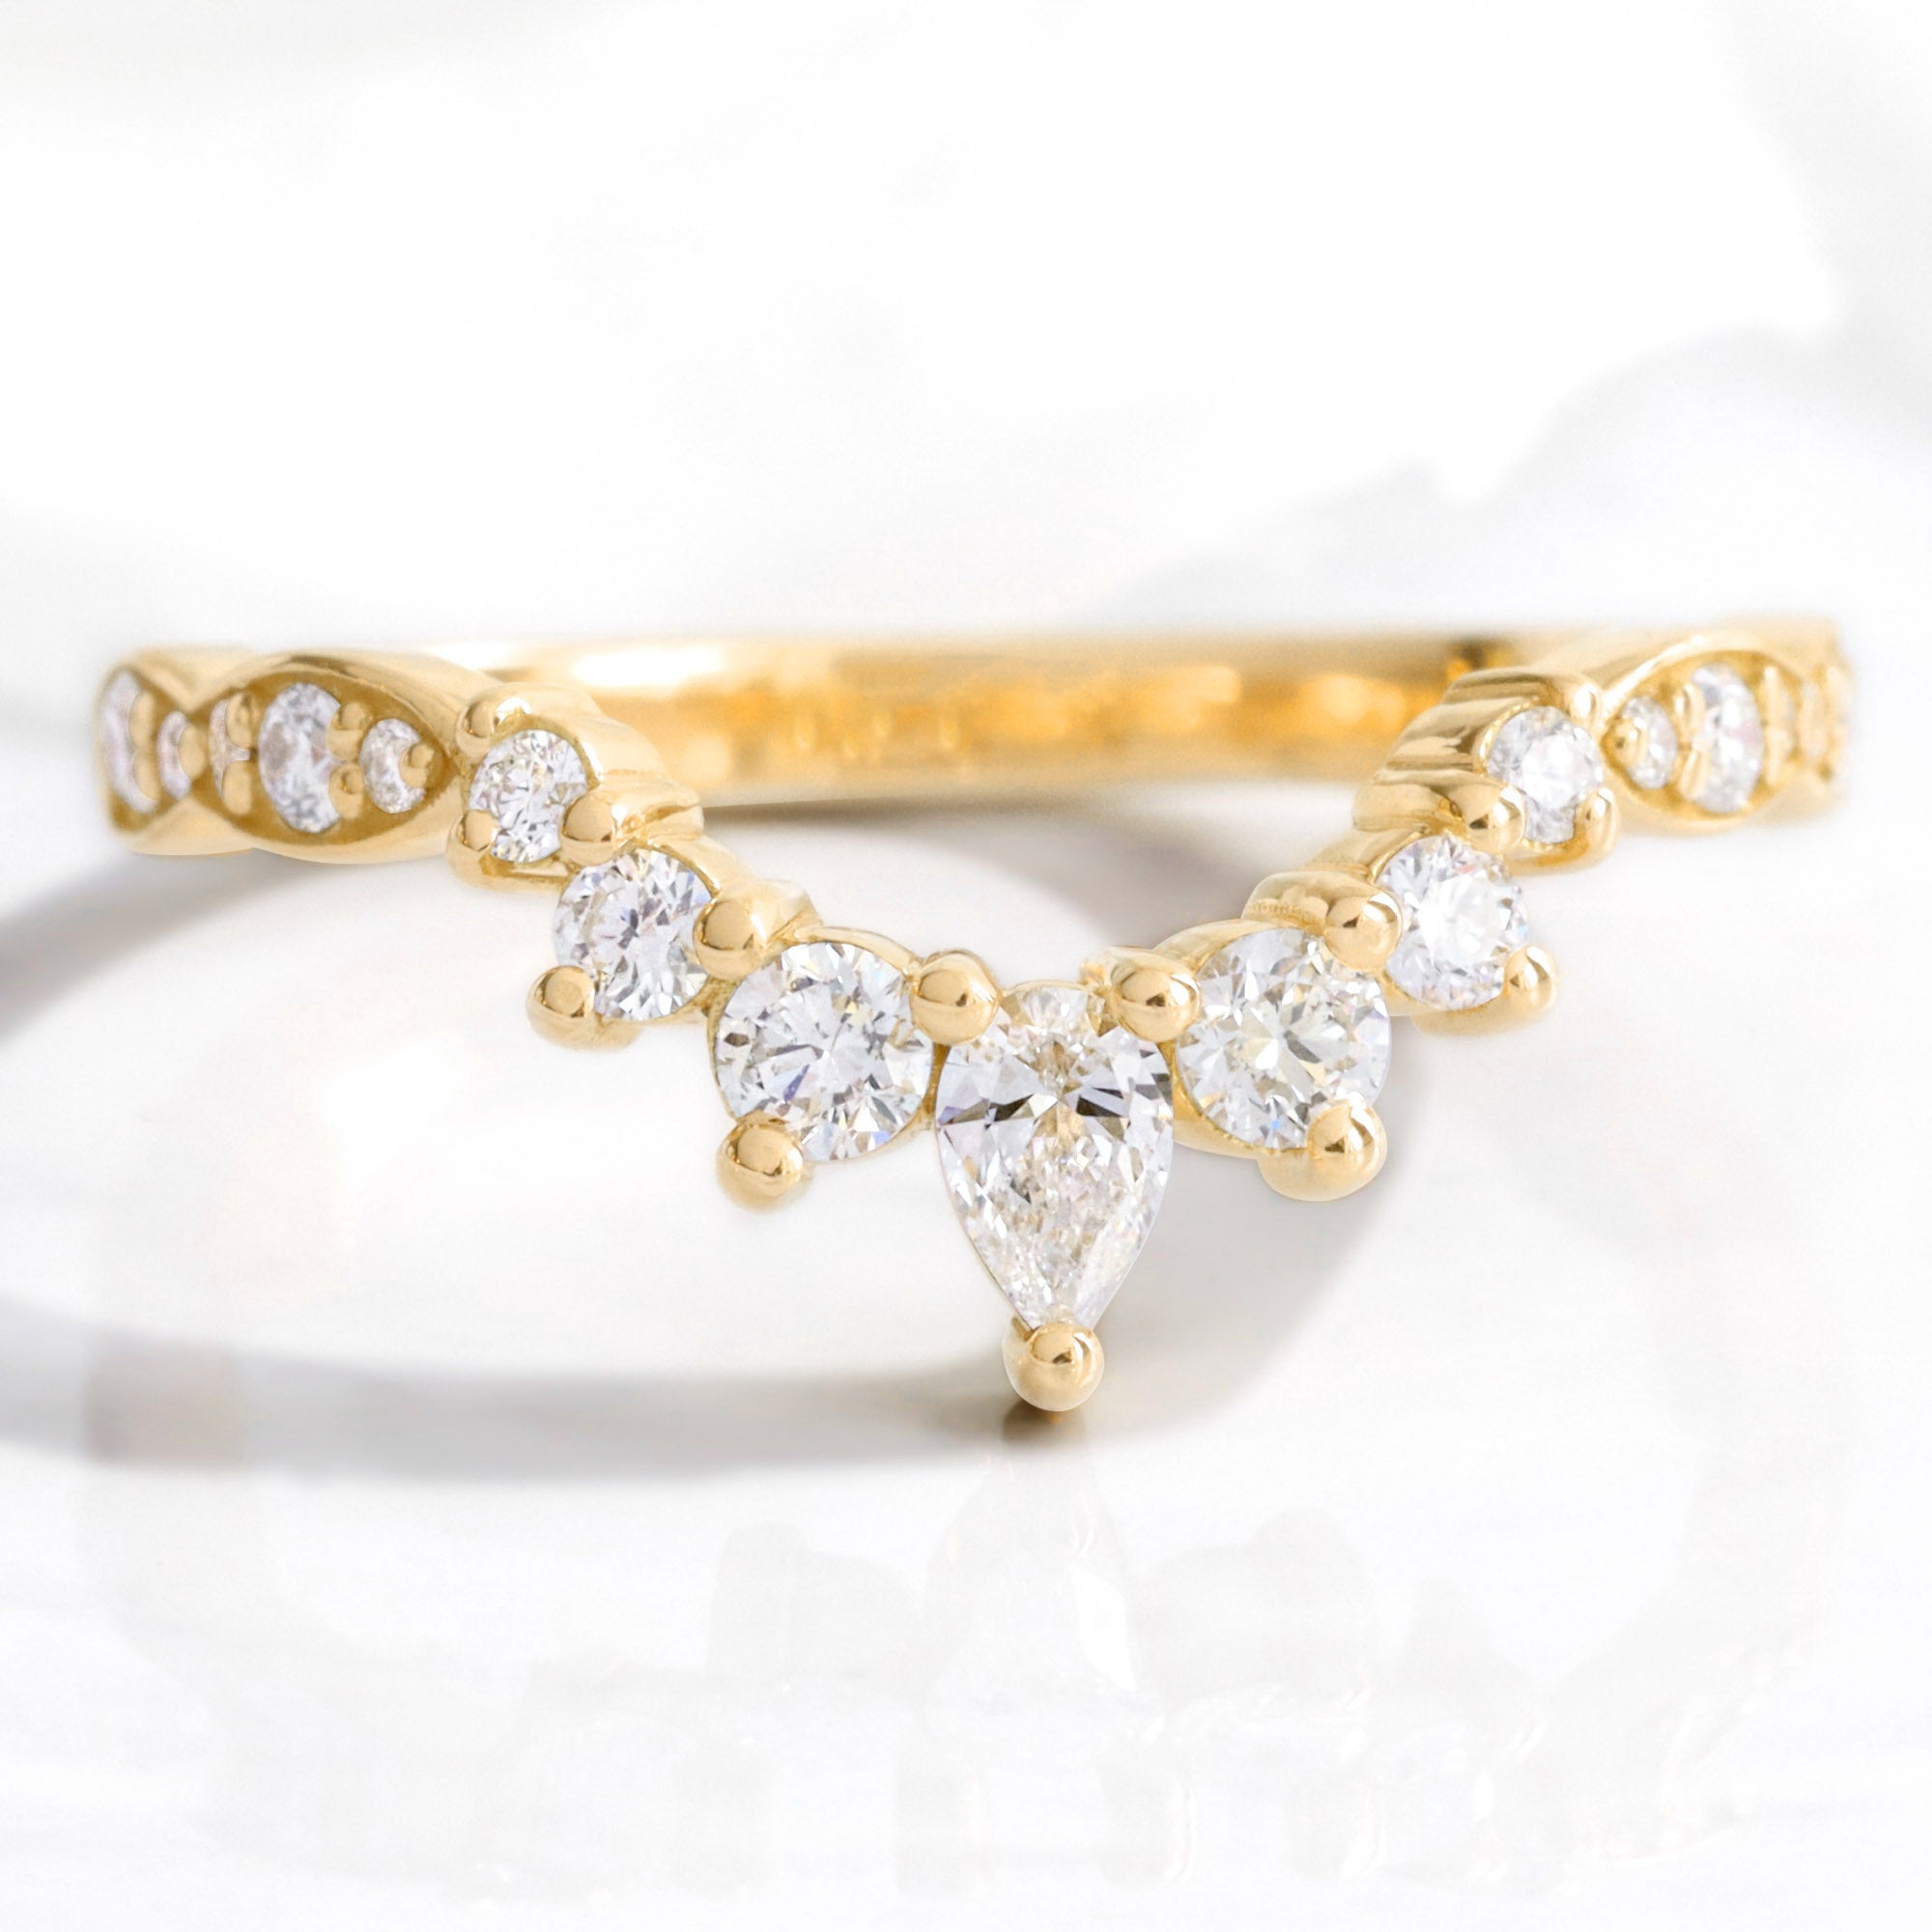 Pear and round diamond wedding ring yellow gold u shaped curved scalloped wedding band la more design jewelry